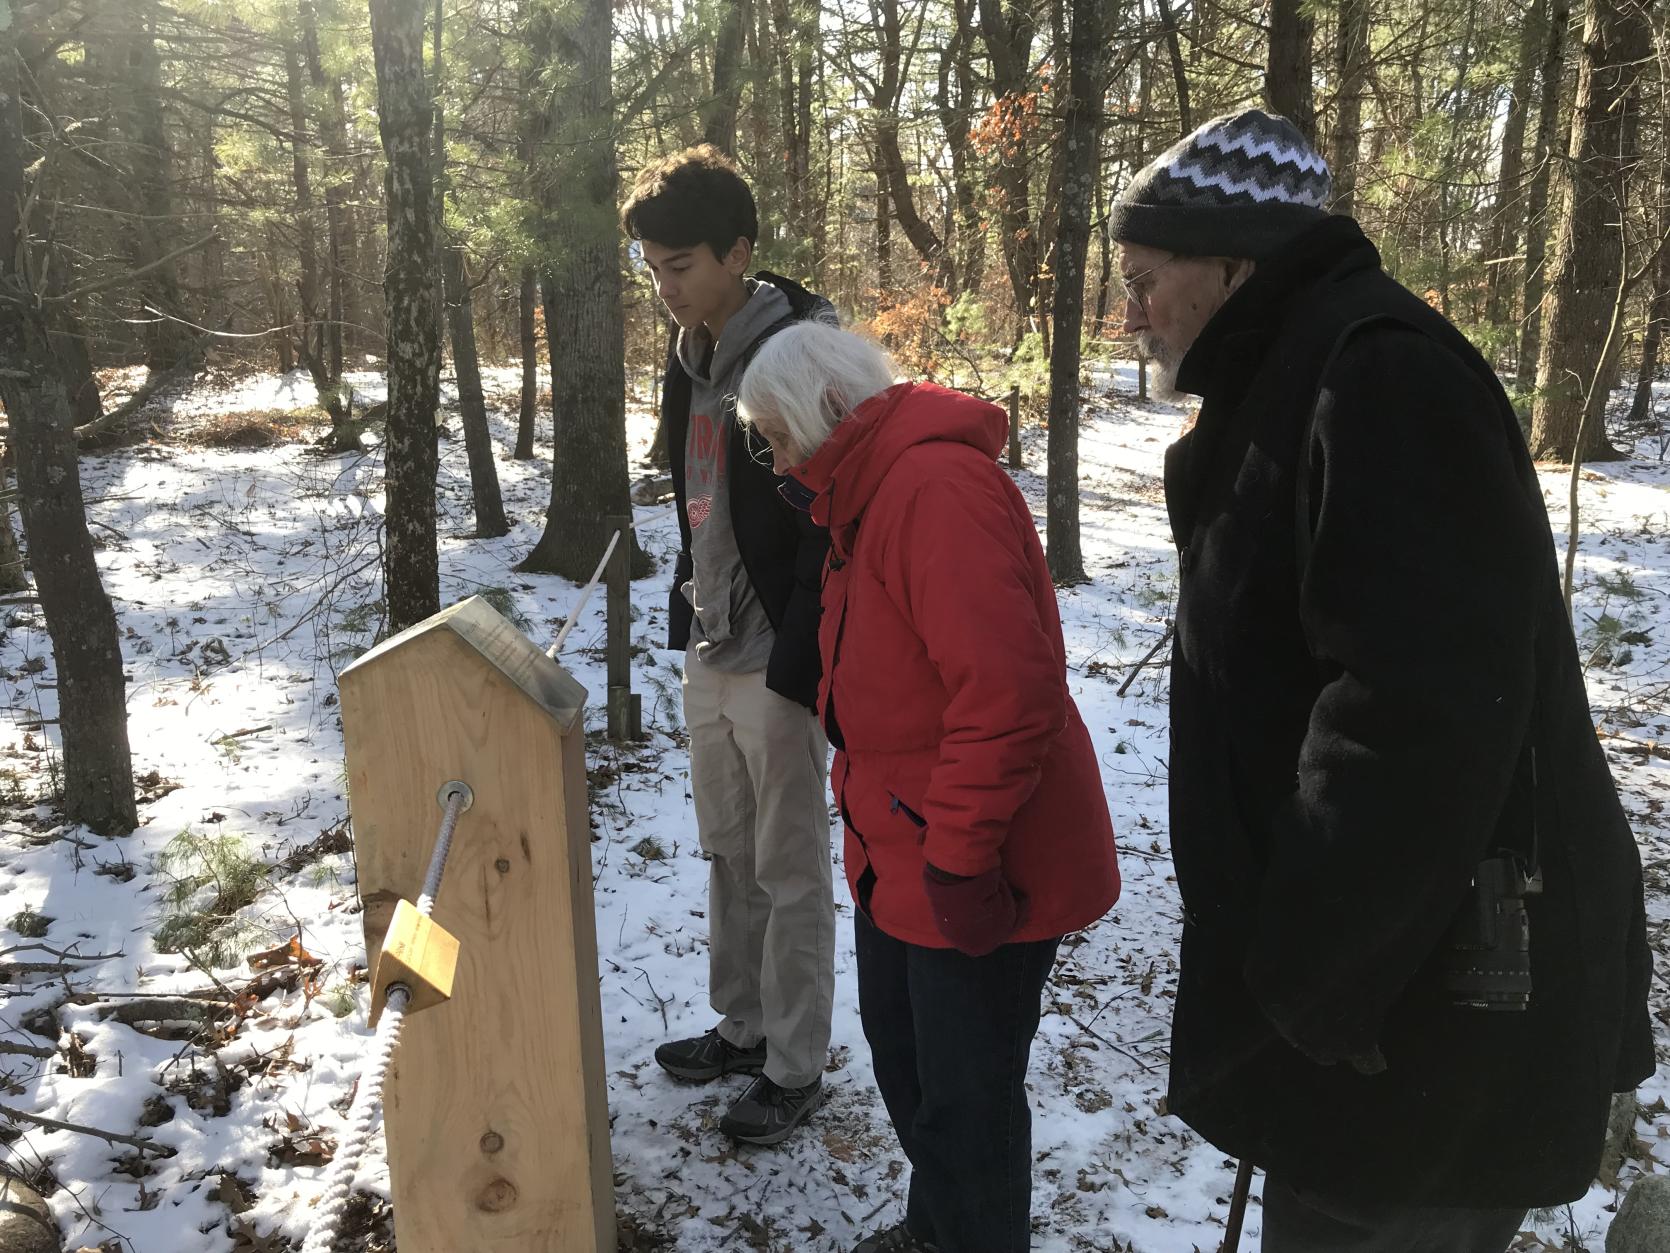 Andrew Hoadley on The Tupelo Trail for Blind Hikers with two other individuals reading one of the Braille markers